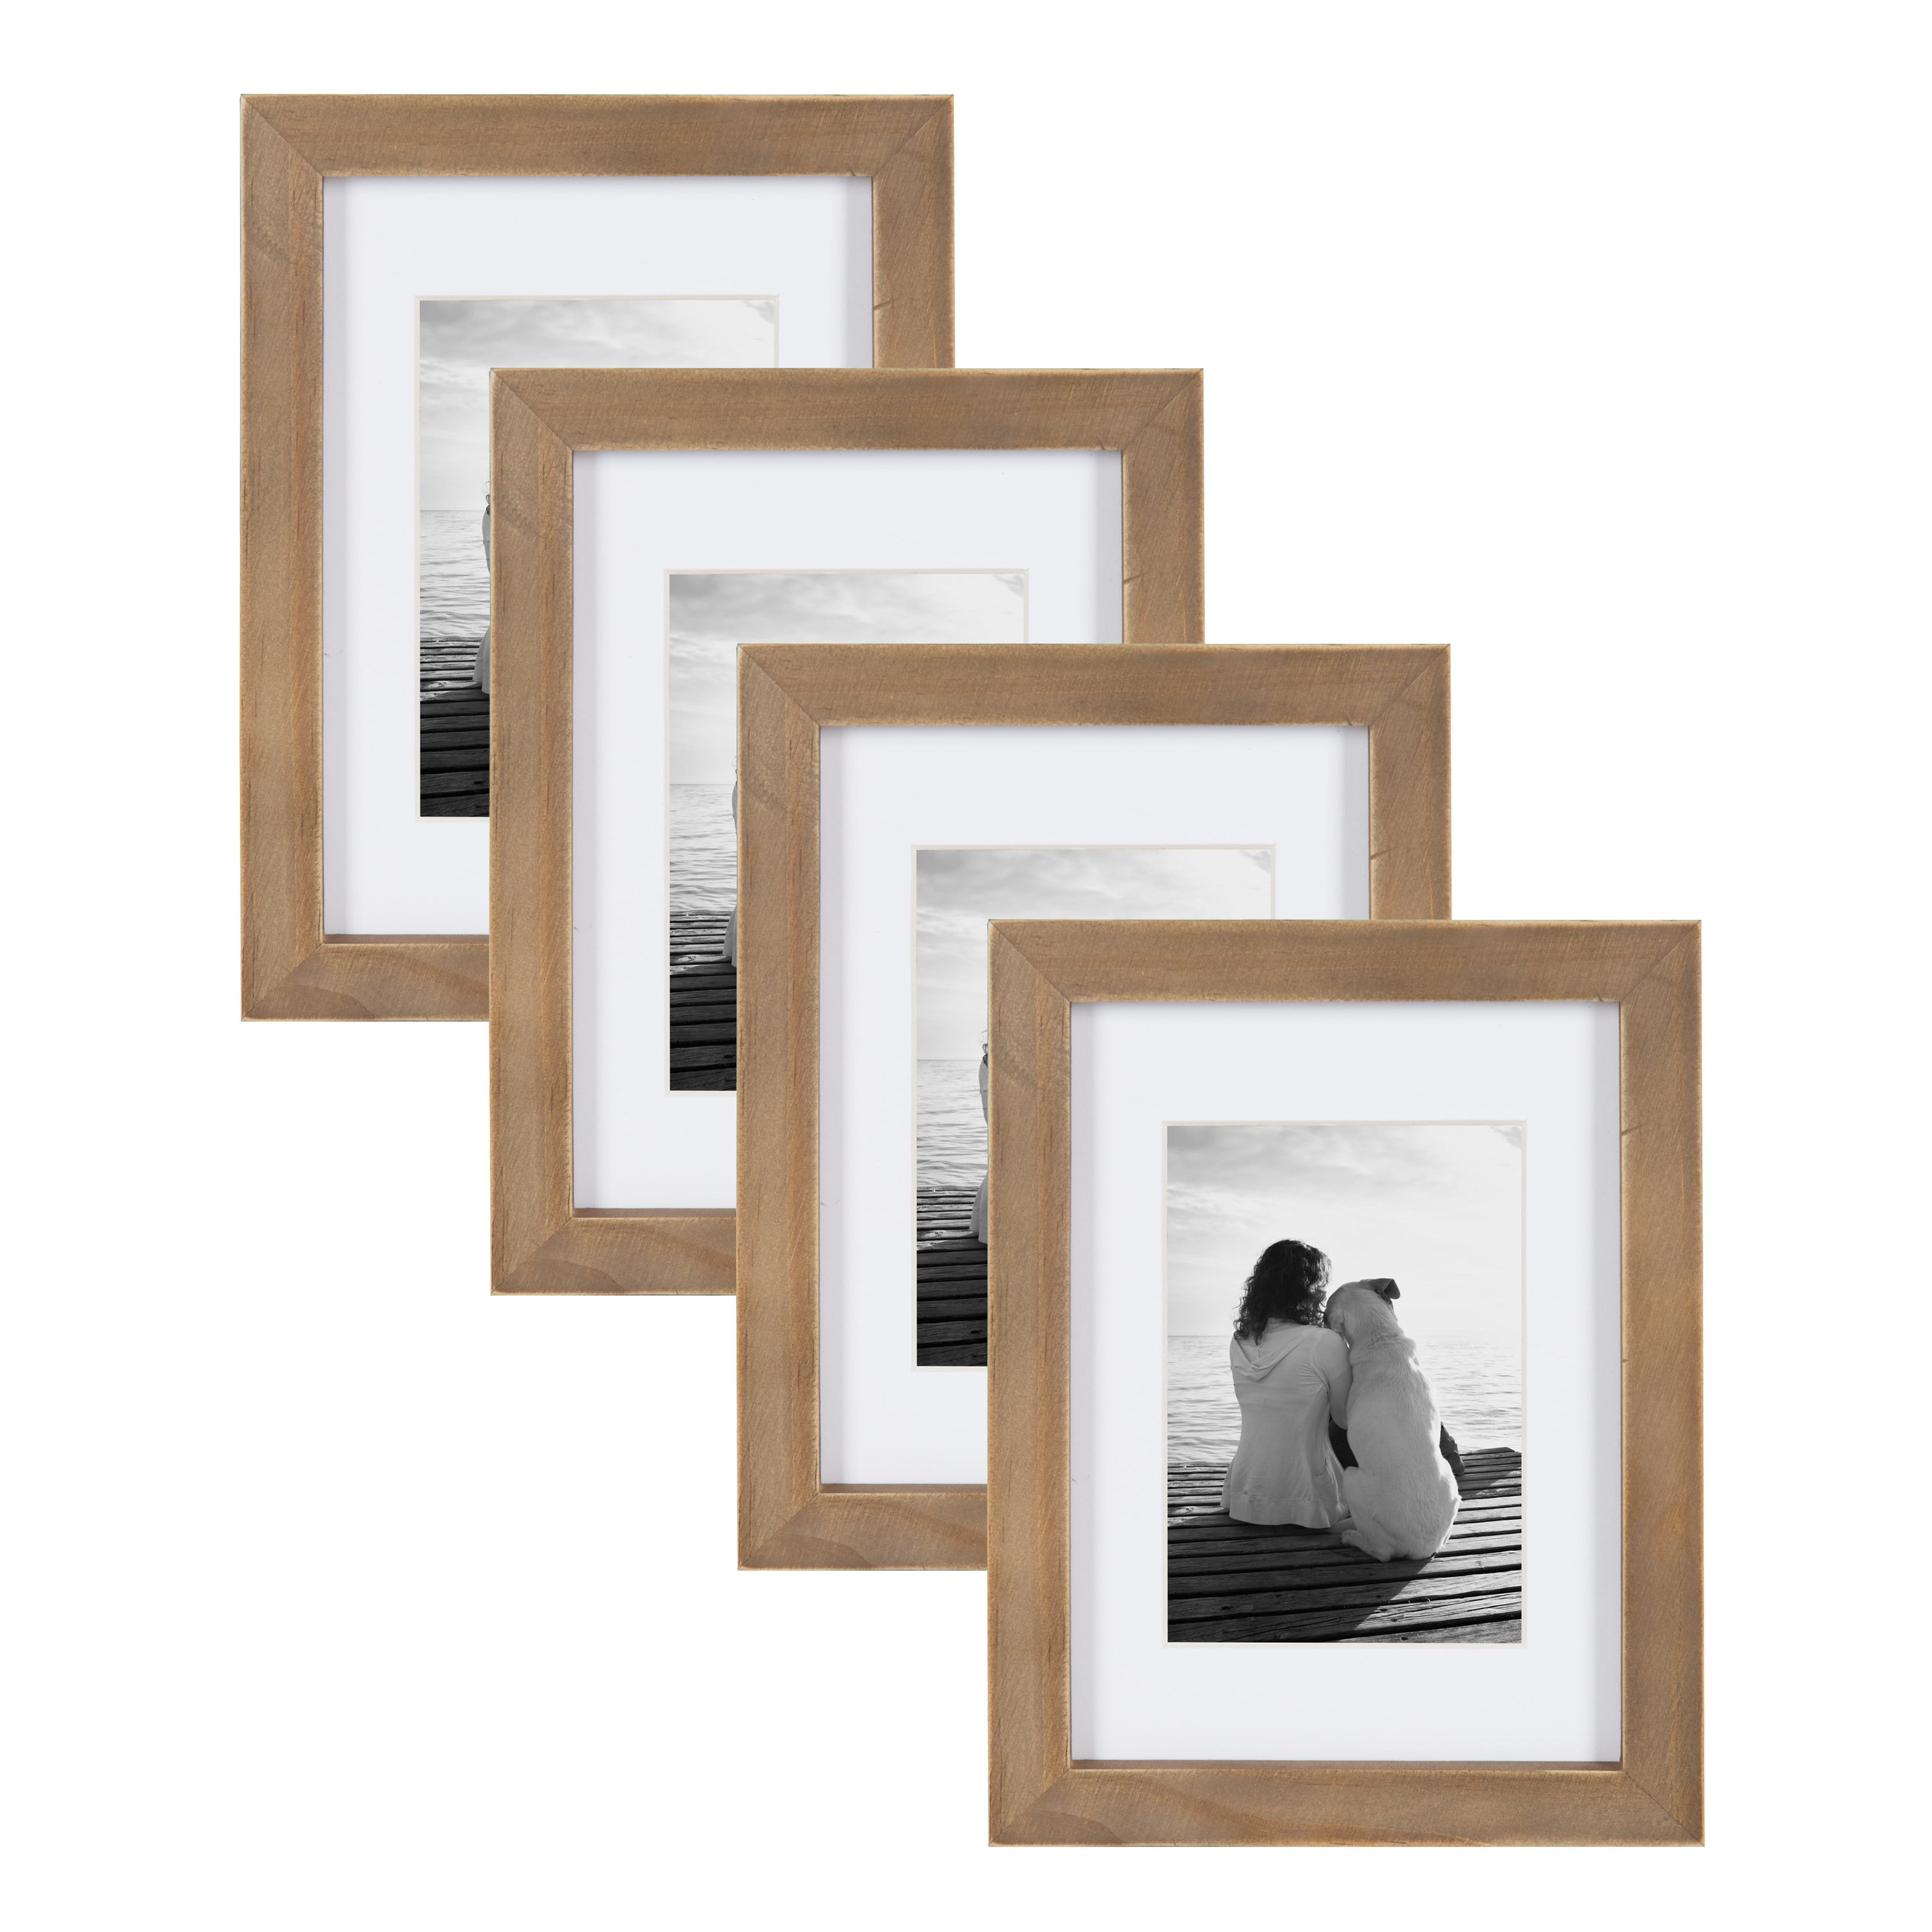 DesignOvation Gallery 8.5x11 Black Wood Document Picture Frame Set of 4